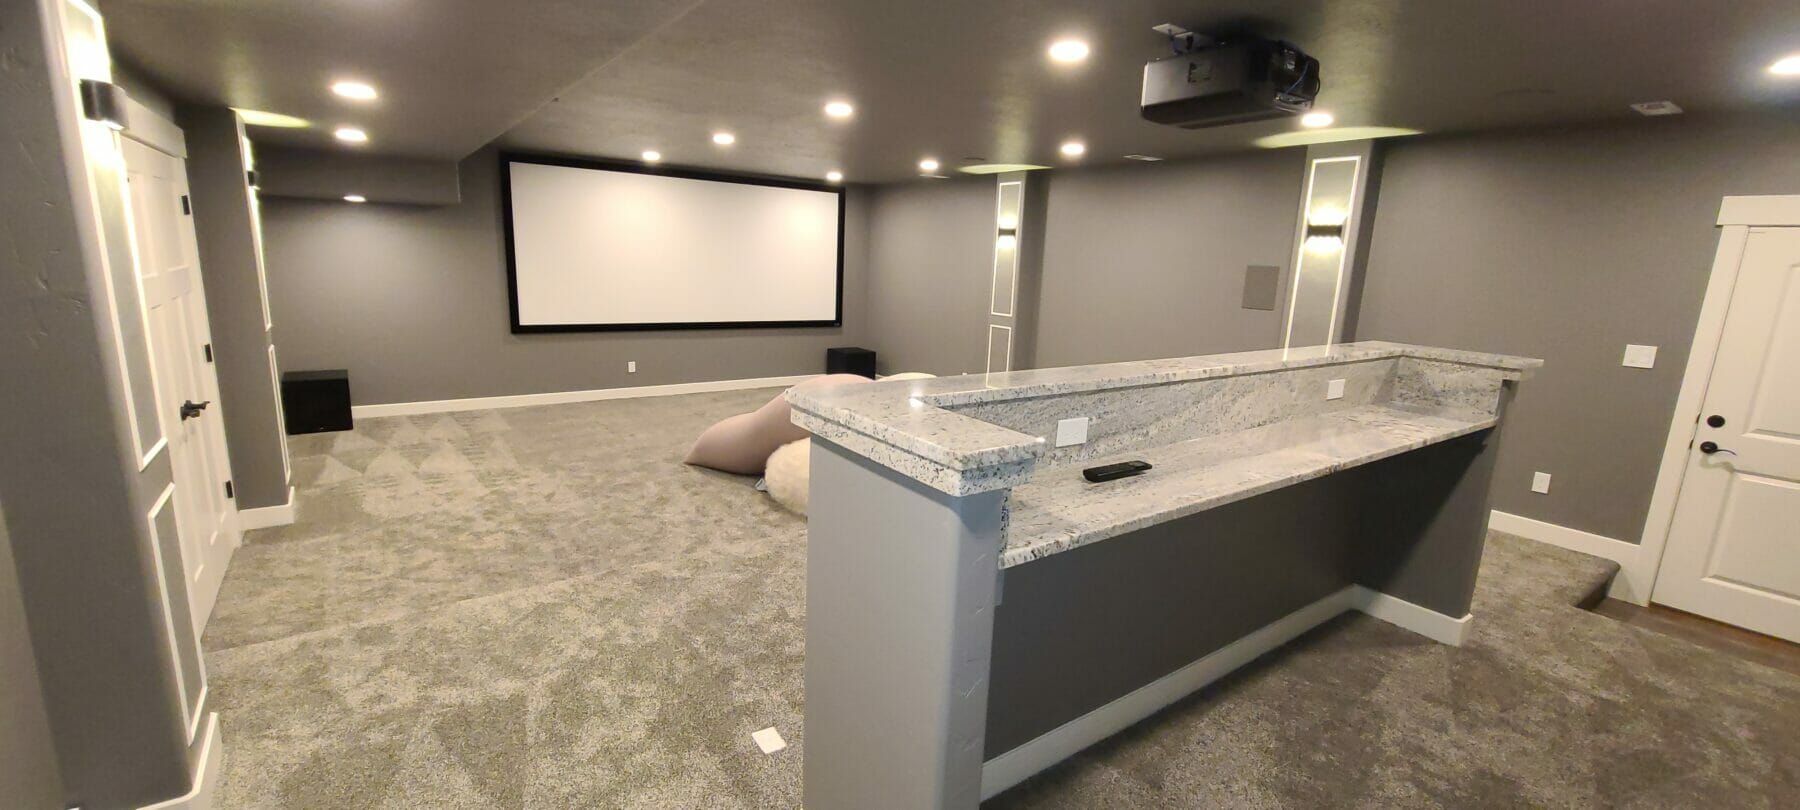 home theater in basement